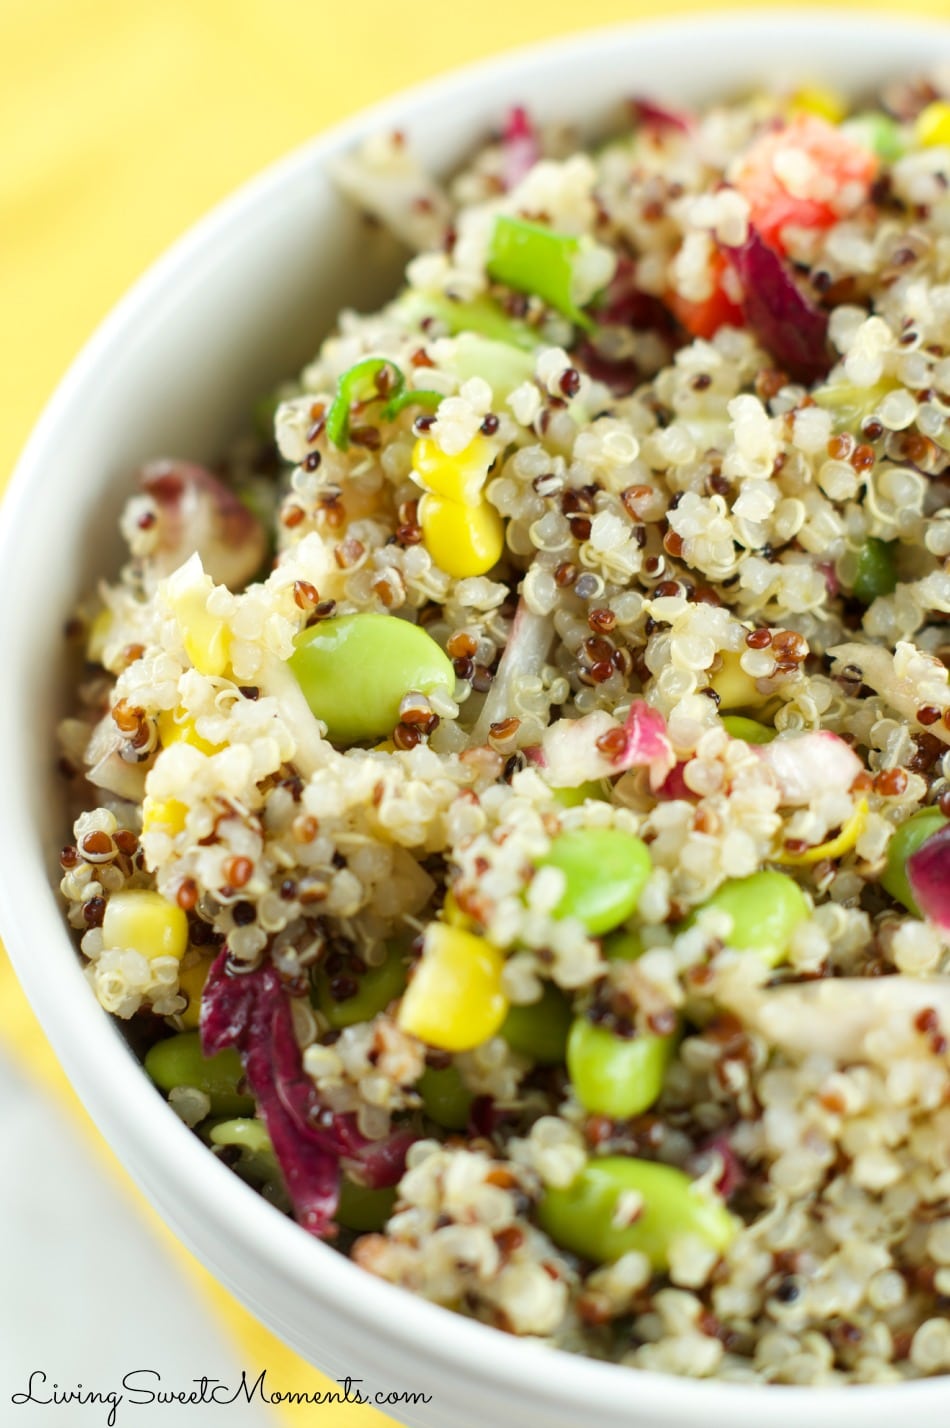 This fresh Quinoa Edamame Salad Recipe is colorful, crunchy and delicious. Served with an Asian-inspired vinaigrette and lots of veggies. Low fat and tasty